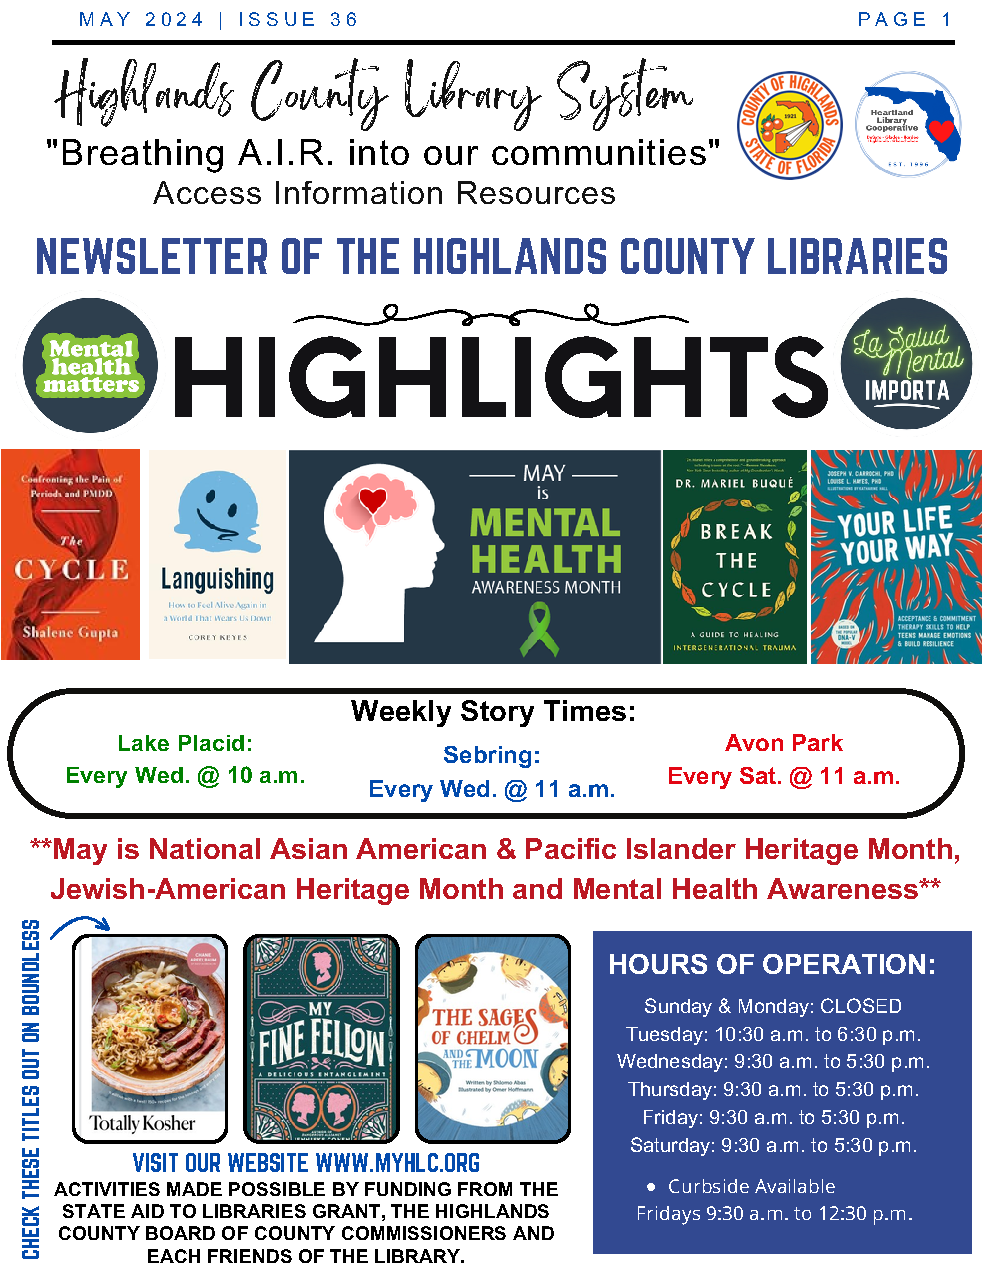 This is page one of the Highlands County Library System April 2024 newsletter. The full PDF version of the newsletter is available by clicking on the image.